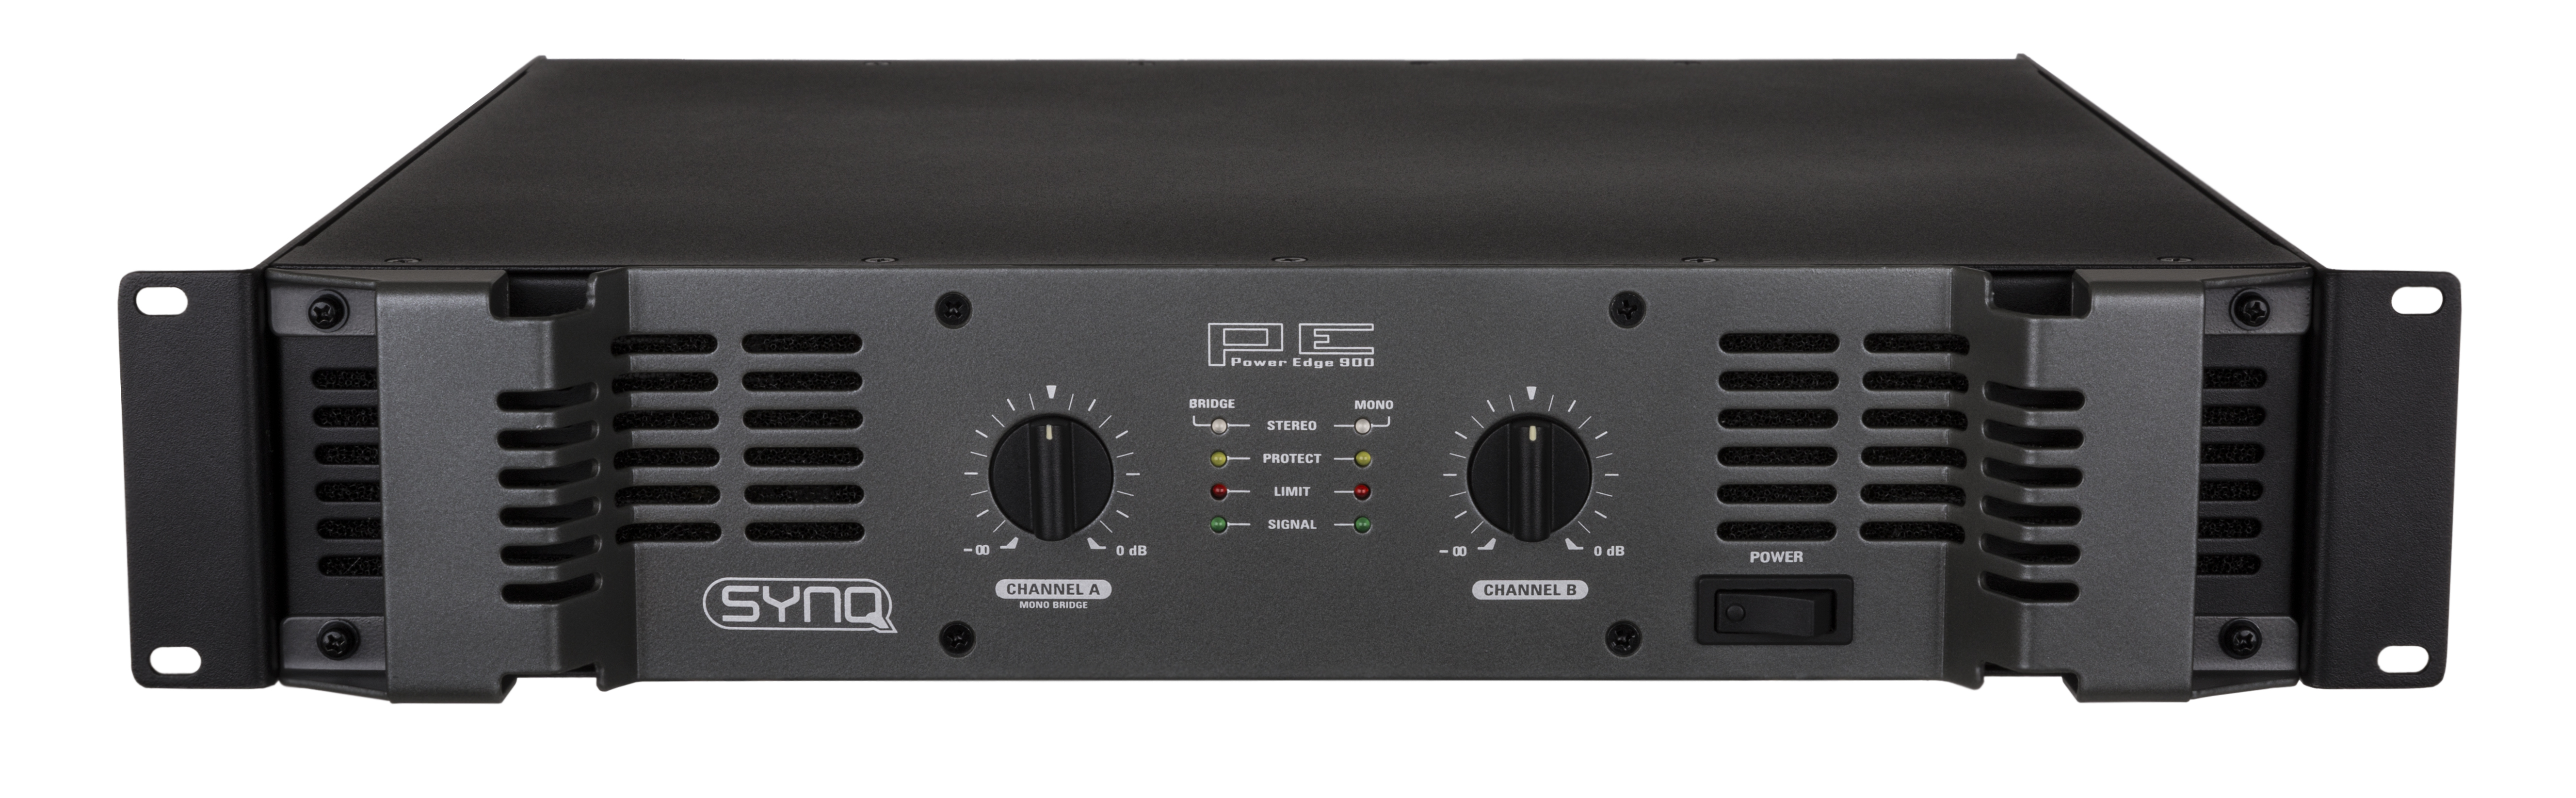 The Power Edge 'Class H' amplifiers are designed for pure power 2x 450Wrms / 4ohm